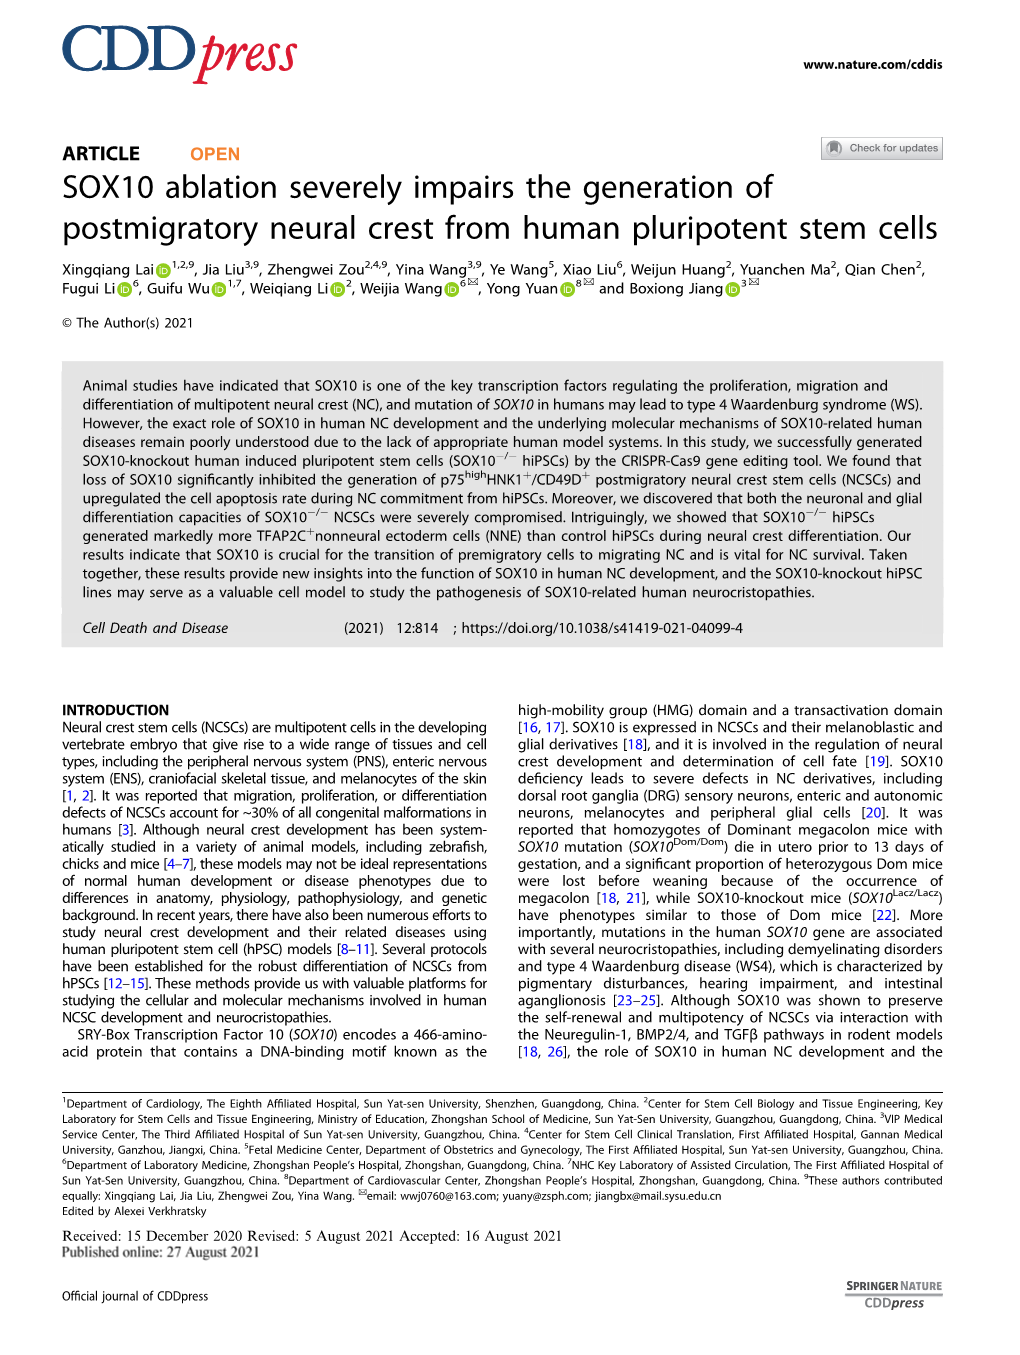 SOX10 Ablation Severely Impairs the Generation of Postmigratory Neural Crest from Human Pluripotent Stem Cells